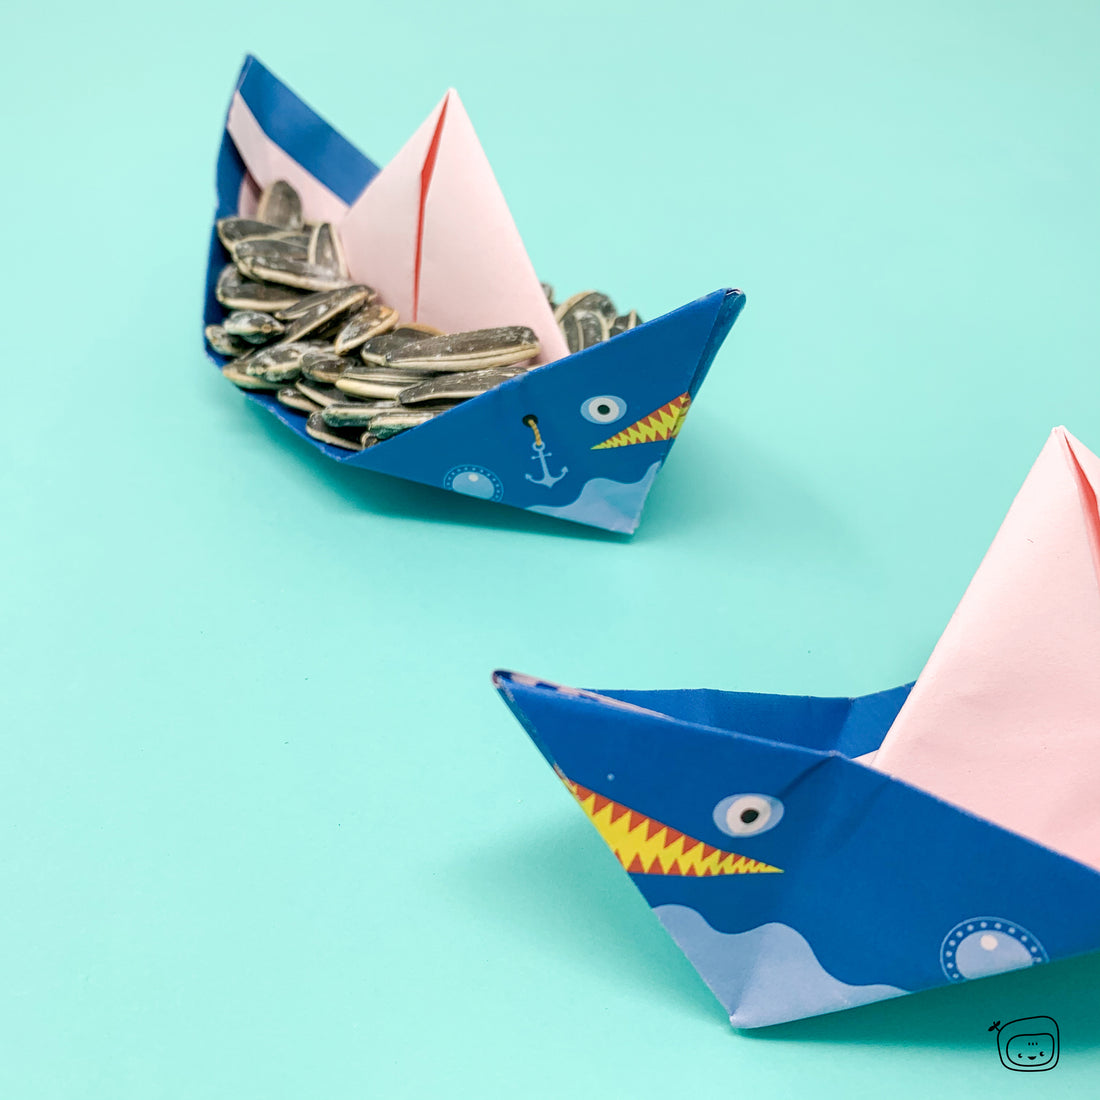 Shark paper boat - crafting with kids - holding nuts - creative ideas for kids PepMelon Adventure Jumbo Box